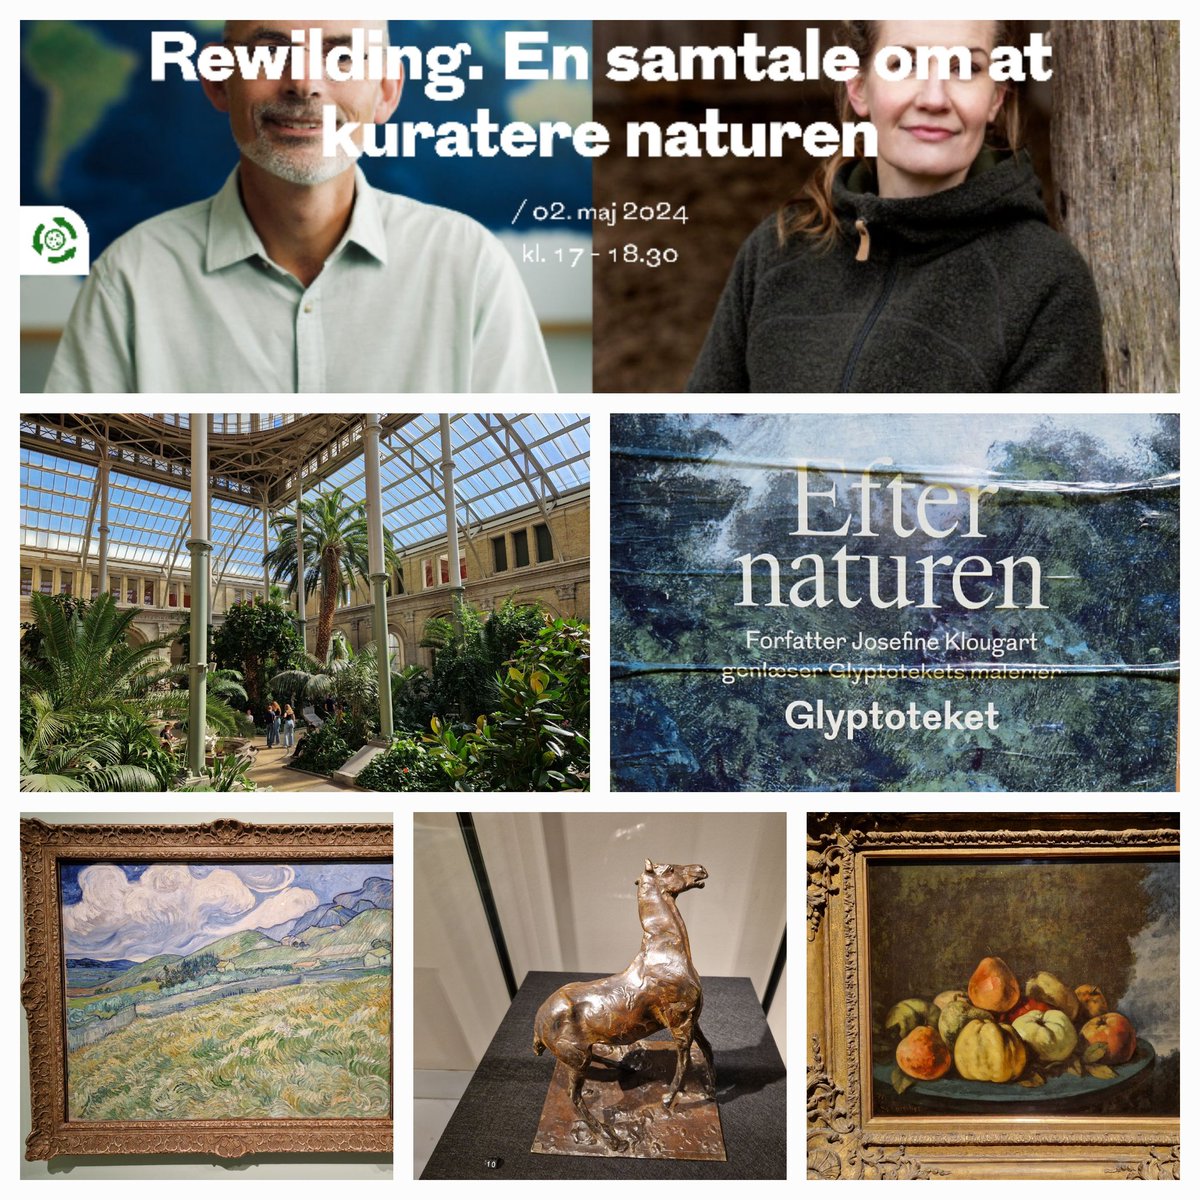 Looking forward to this evening's public conversation w/ @MariaGjerding on #nature, #biodiversity & #rewilding, in relation to the 'After nature' exhibition @Glyptoteket 🦬🌿🦋🌼🎨🖼🐎